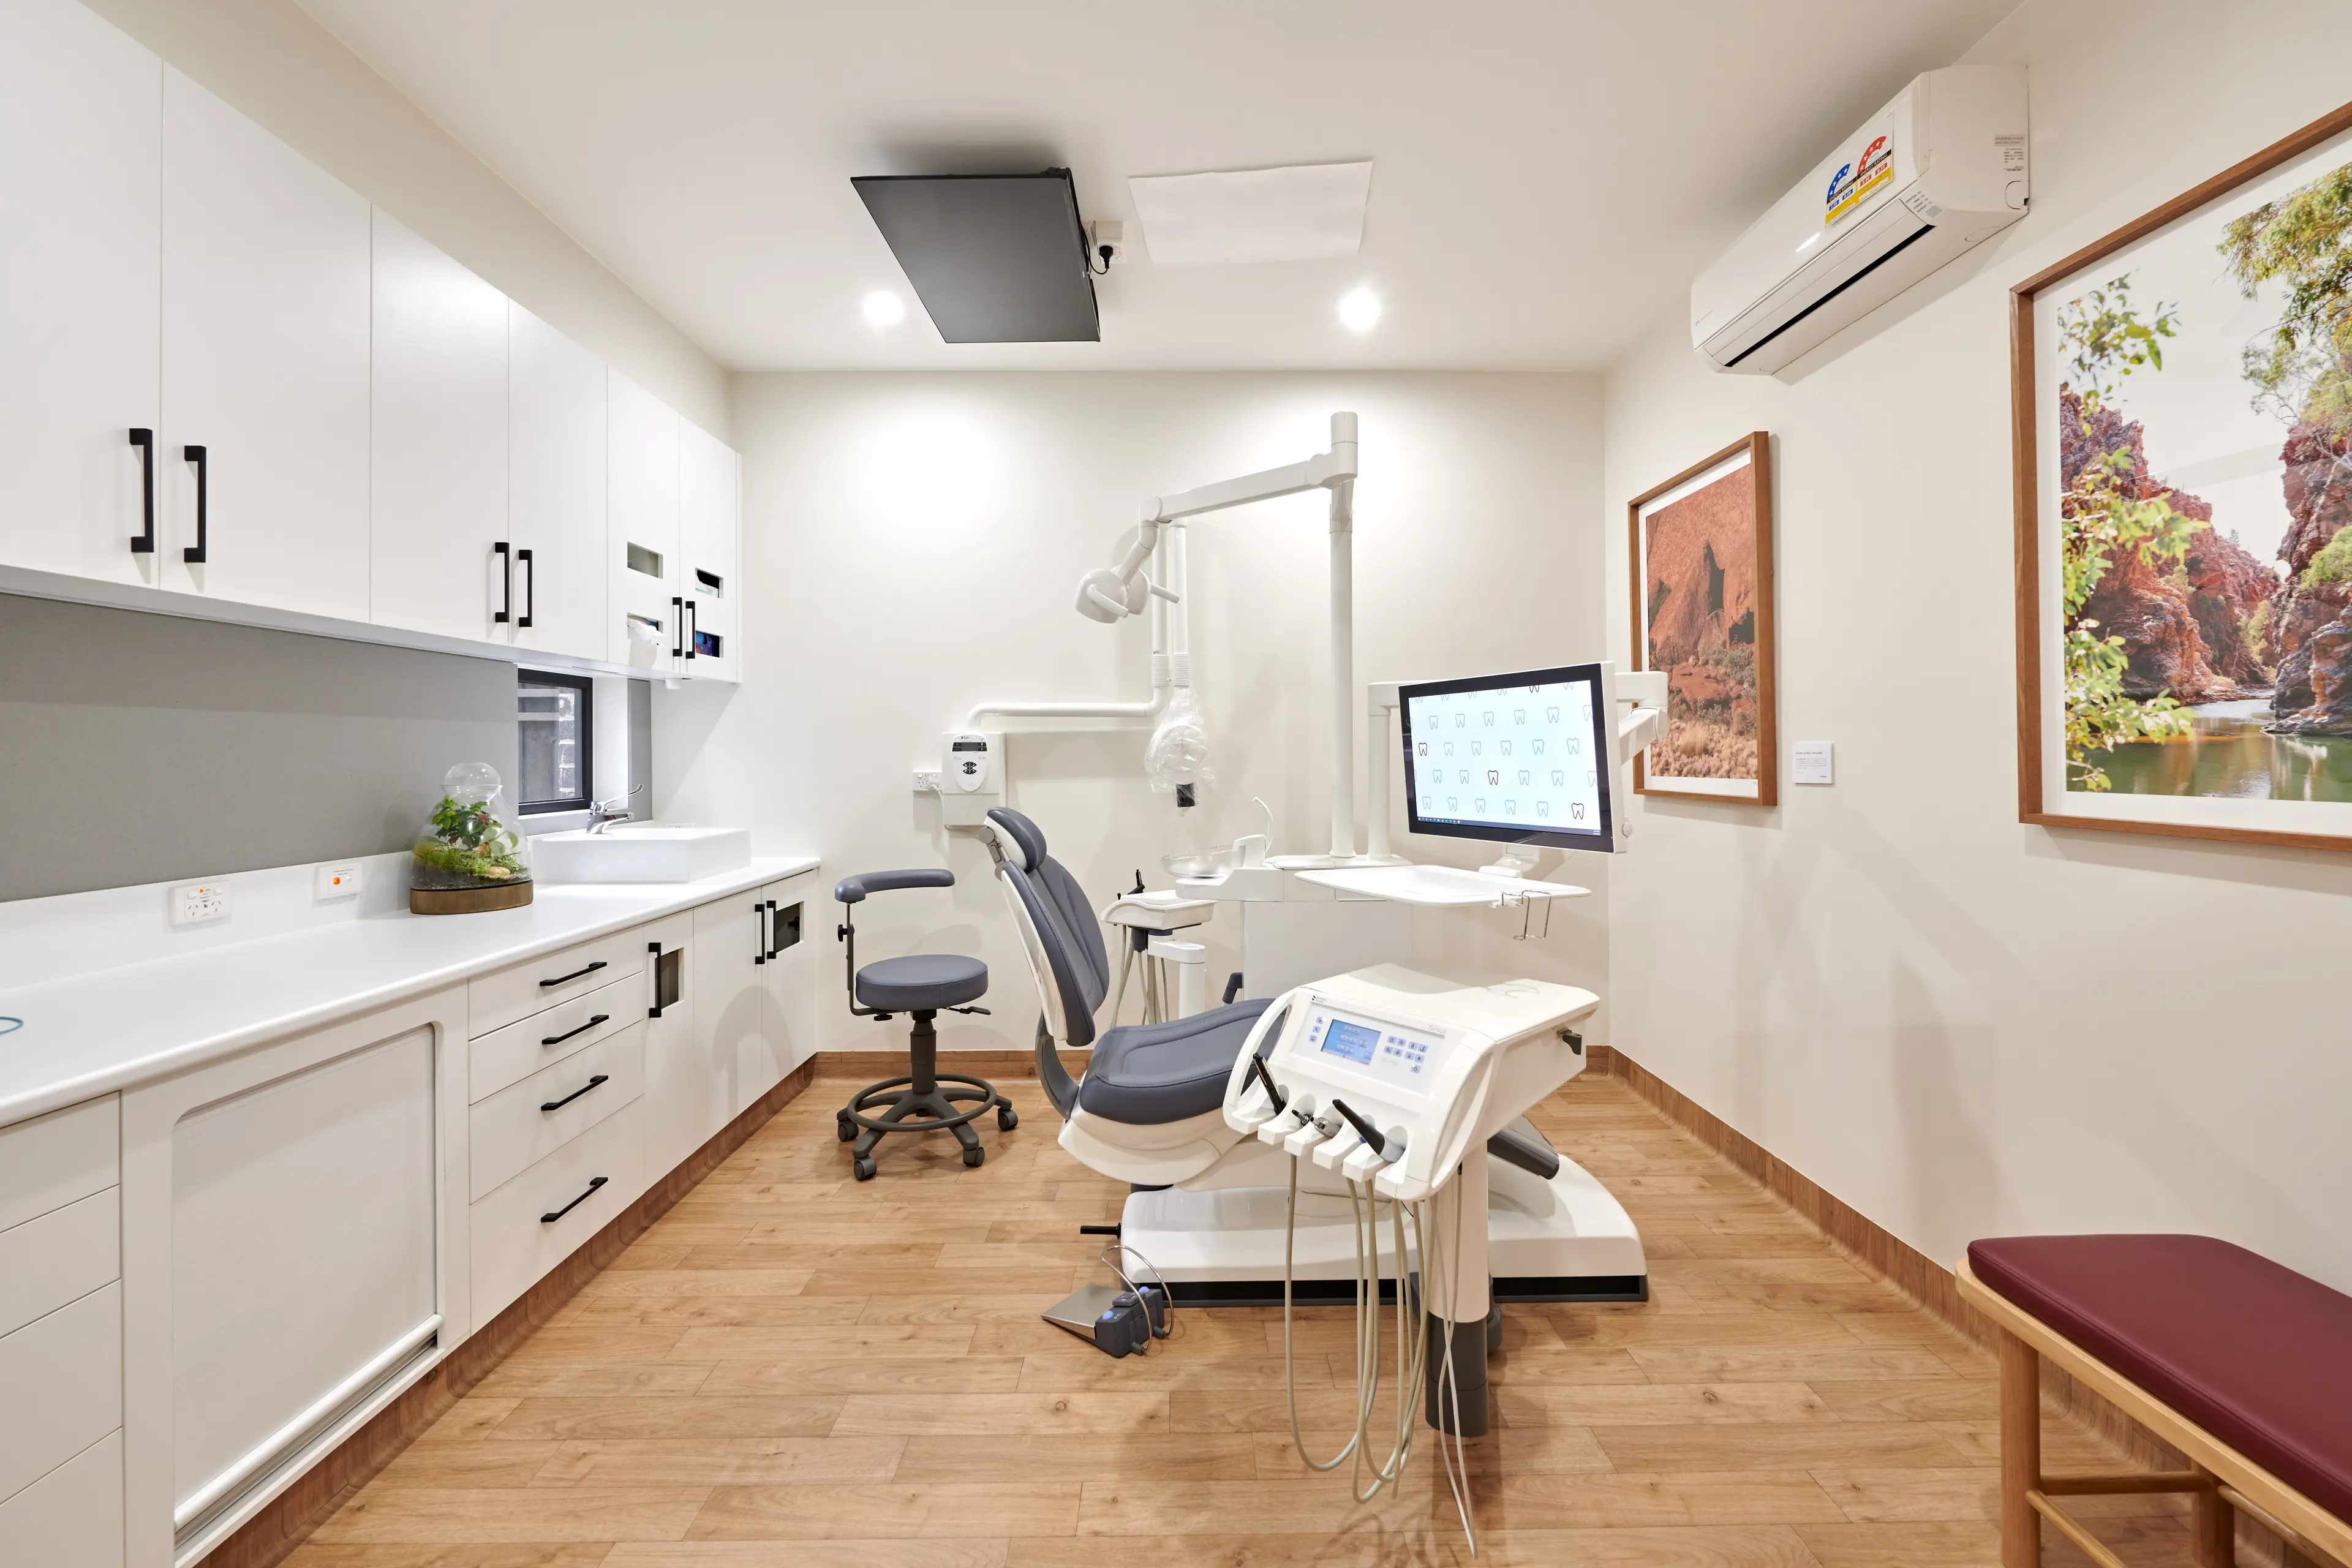 Northvale Dental - medical interior design, joinery and fitout - Northcote, Melbourne, Australia